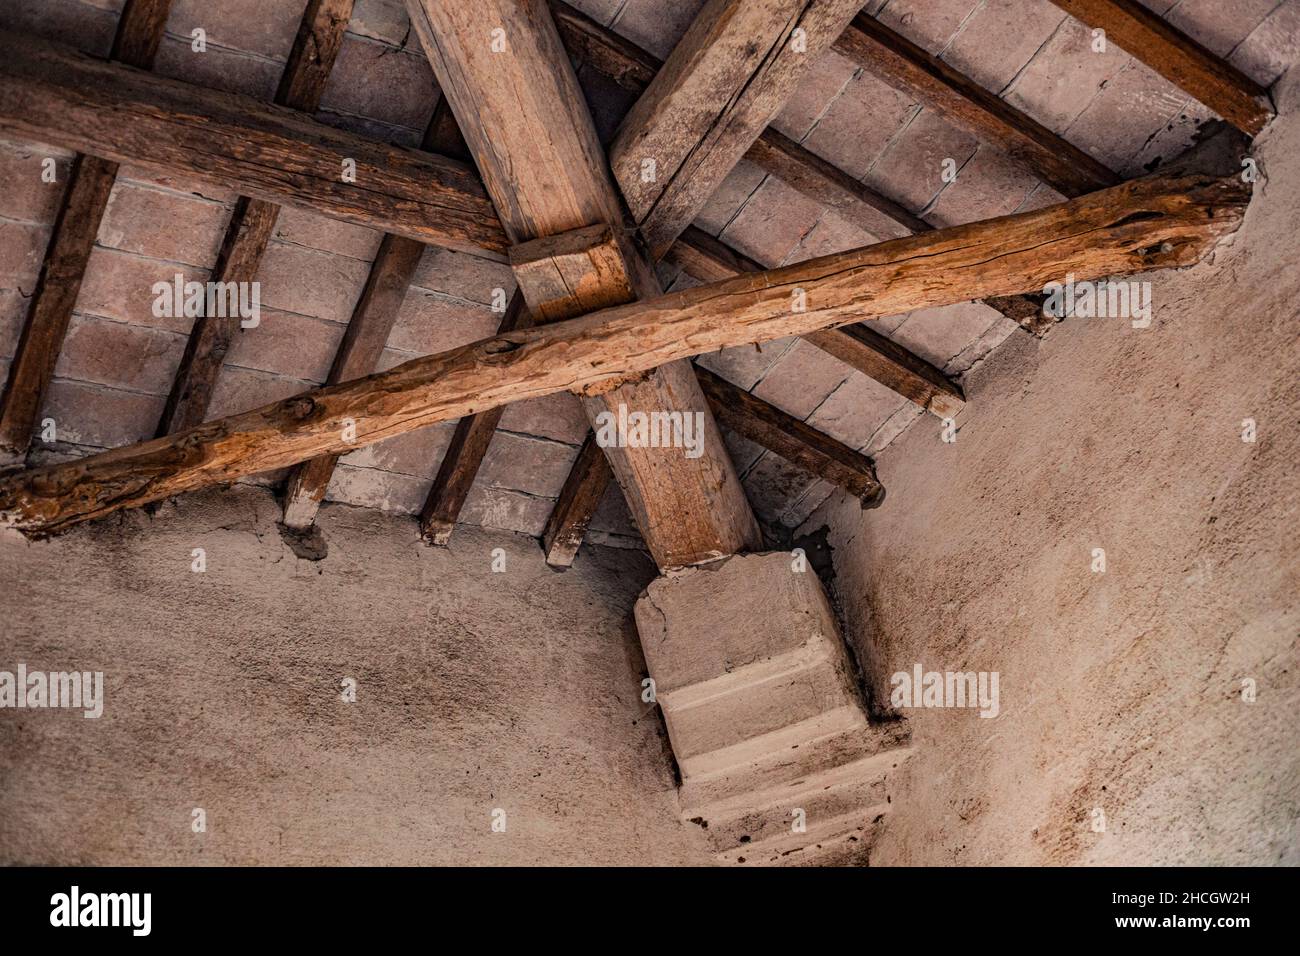 Wooden beams on the ceiling of an old and abandoned building Stock Photo